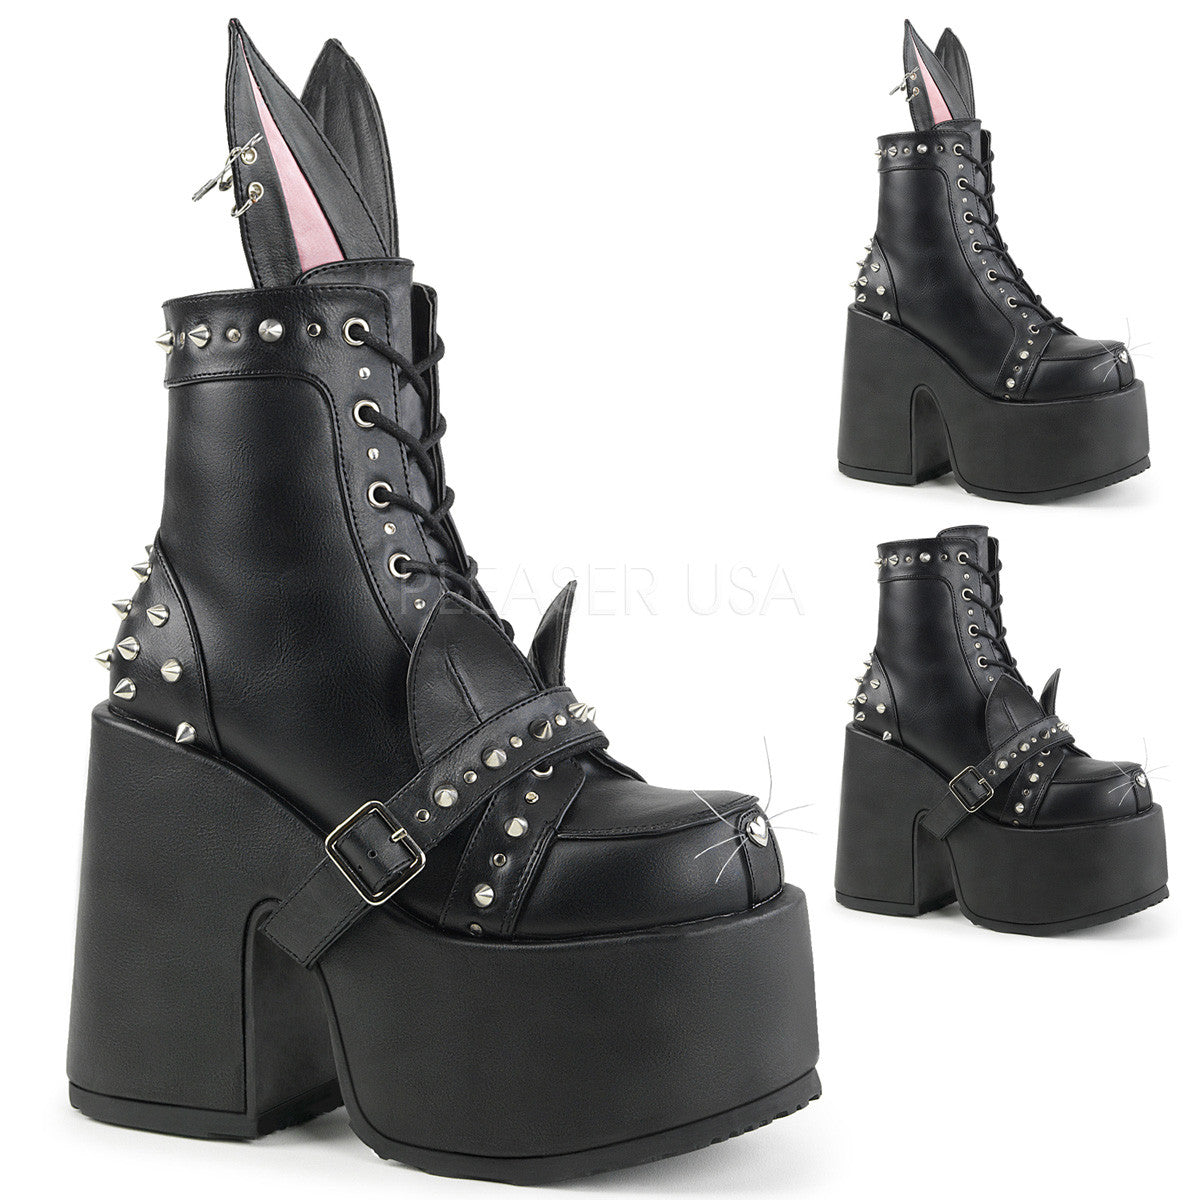 5" Chunky Heel Platform Lace-Up Front Ankle Boot With Interchangable Bunny Ear Design